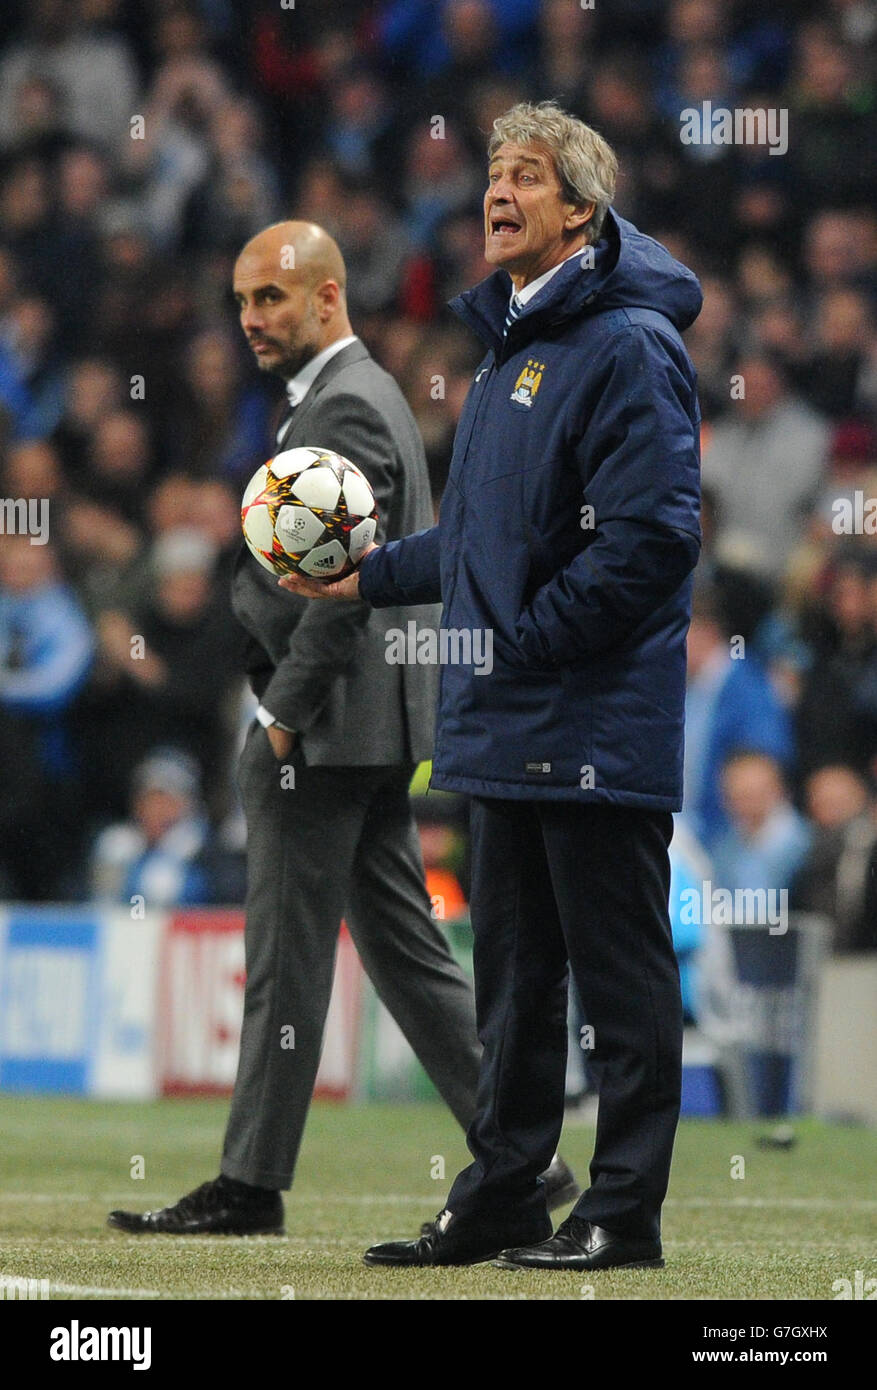 Manchester City manager Manuel Pellegrini (right) and Bayern Munich manager Pep Guardiola on the touchline during the UEFA Champions League match at the Etihad Stadium, Manchester. Stock Photo